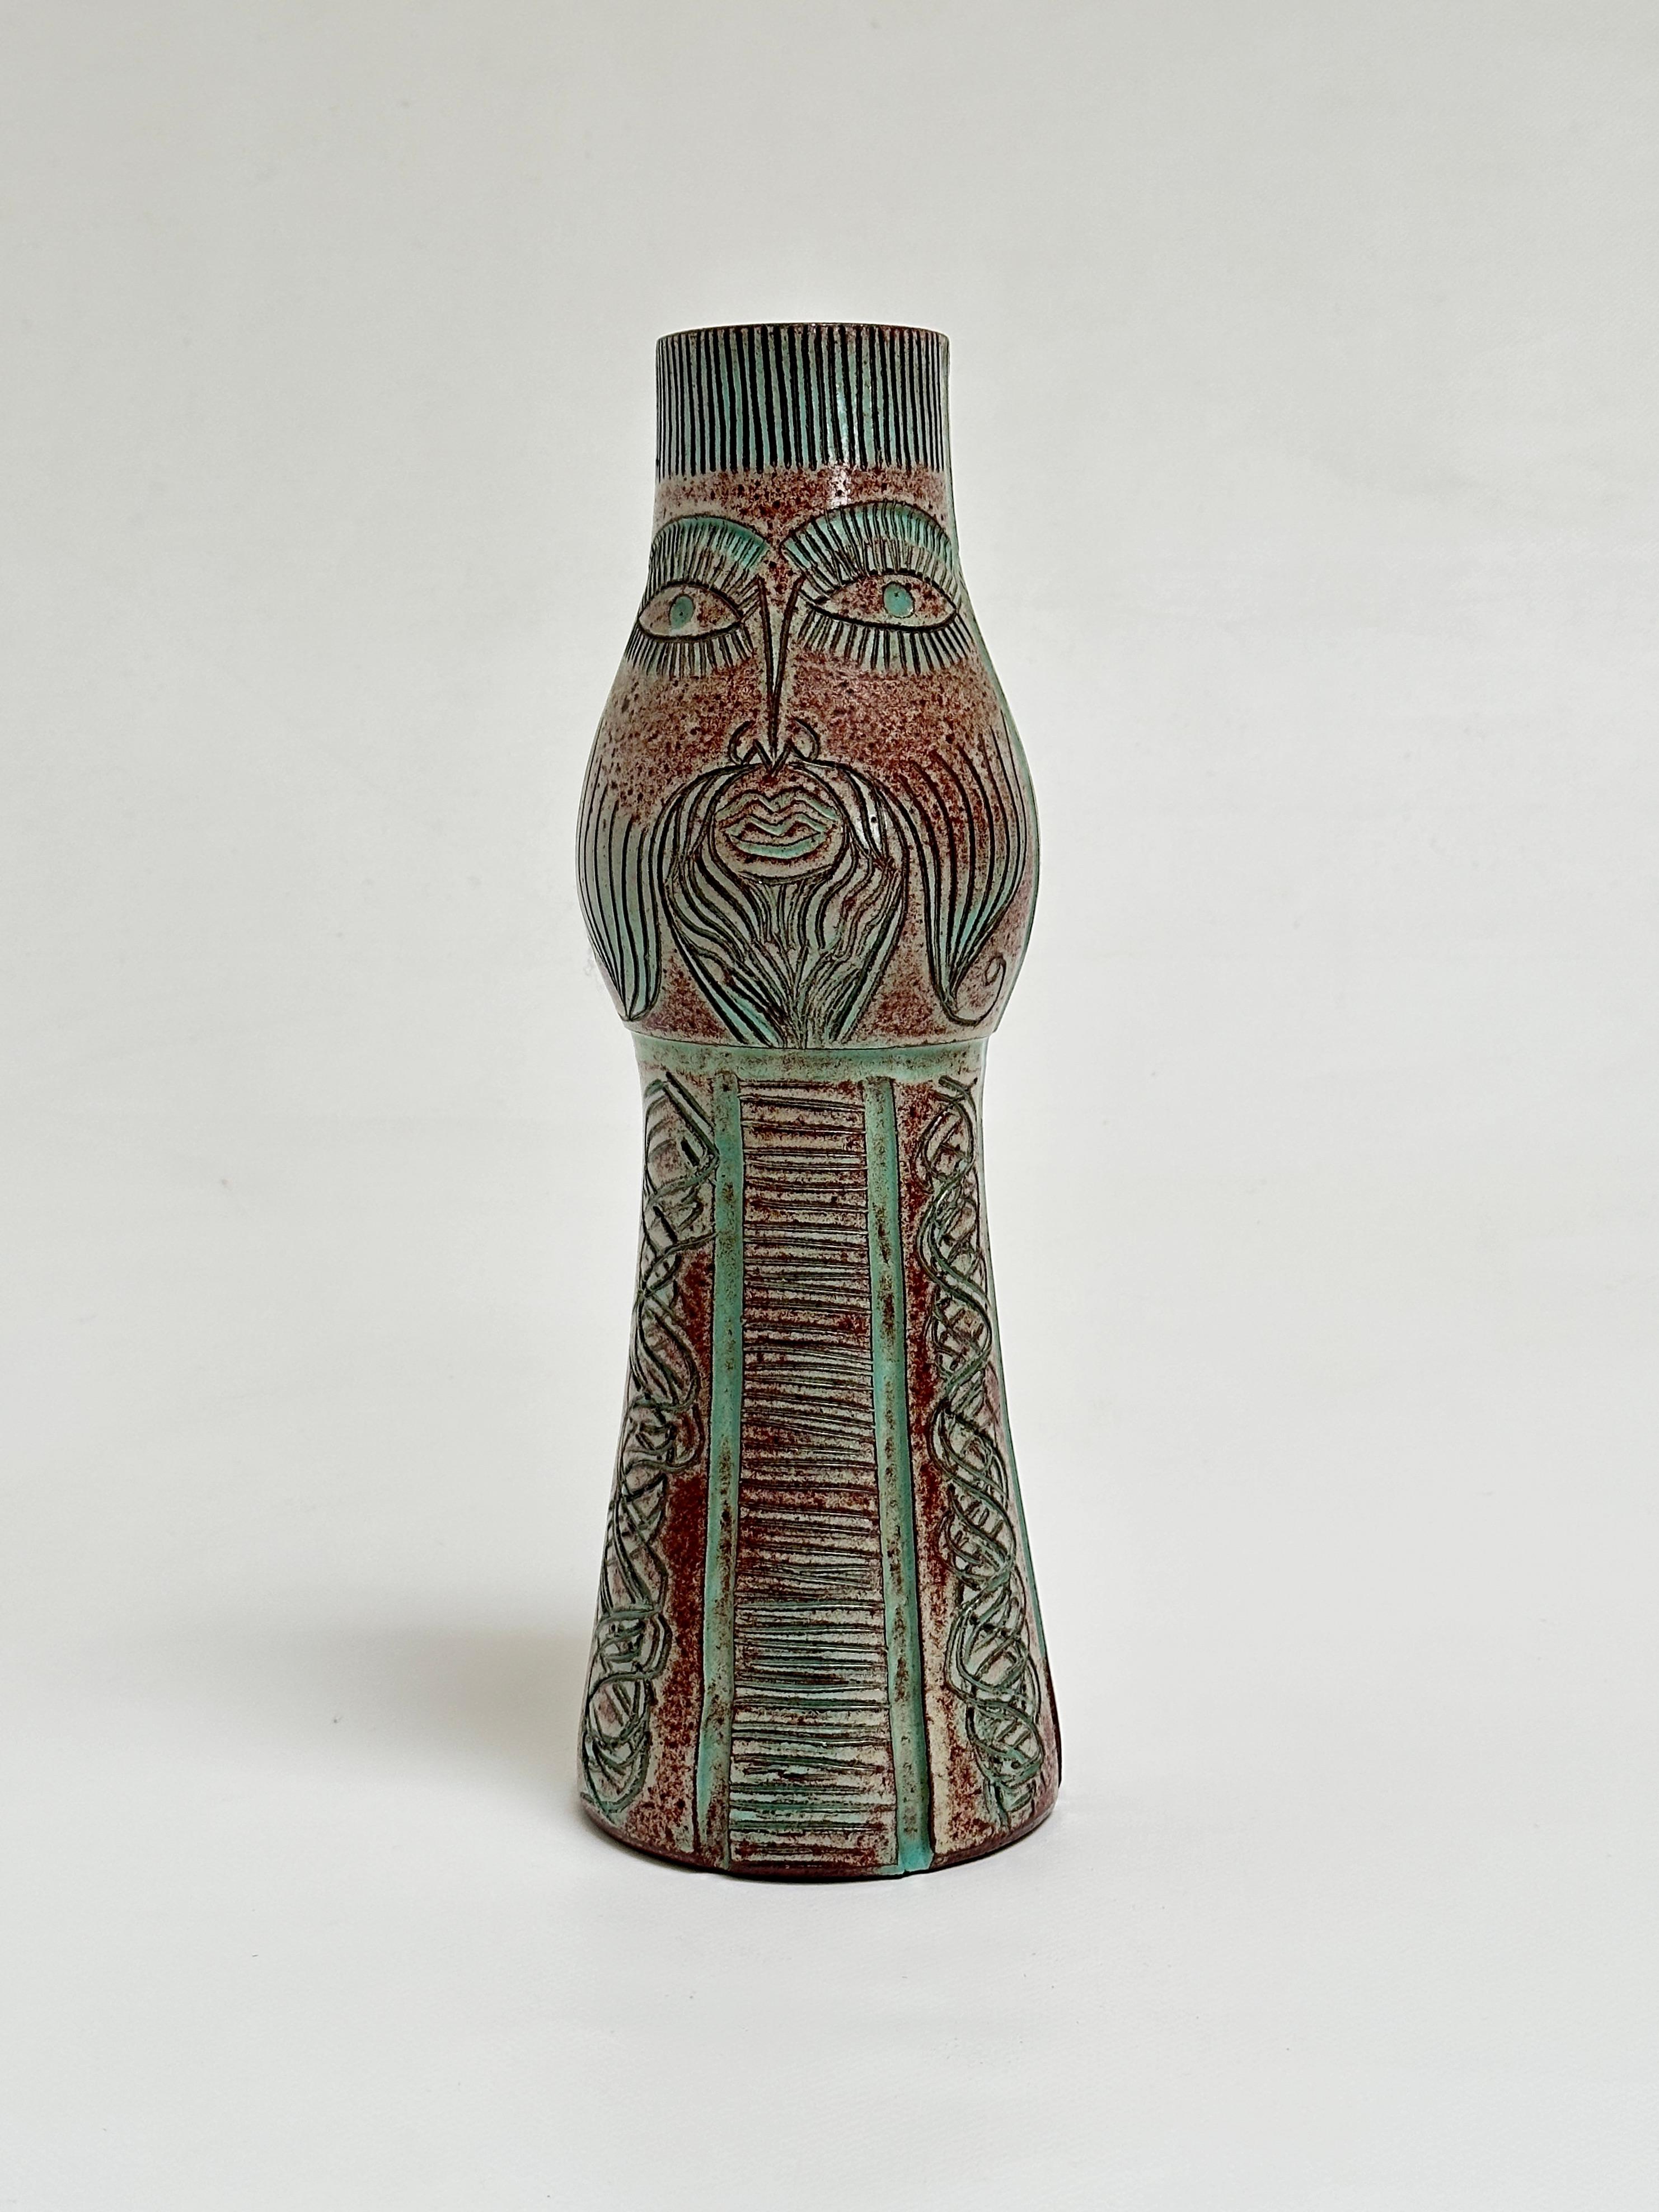 Anthropomorphic Vase, Accolay, France c. 1960 In Excellent Condition For Sale In St Ouen, FR